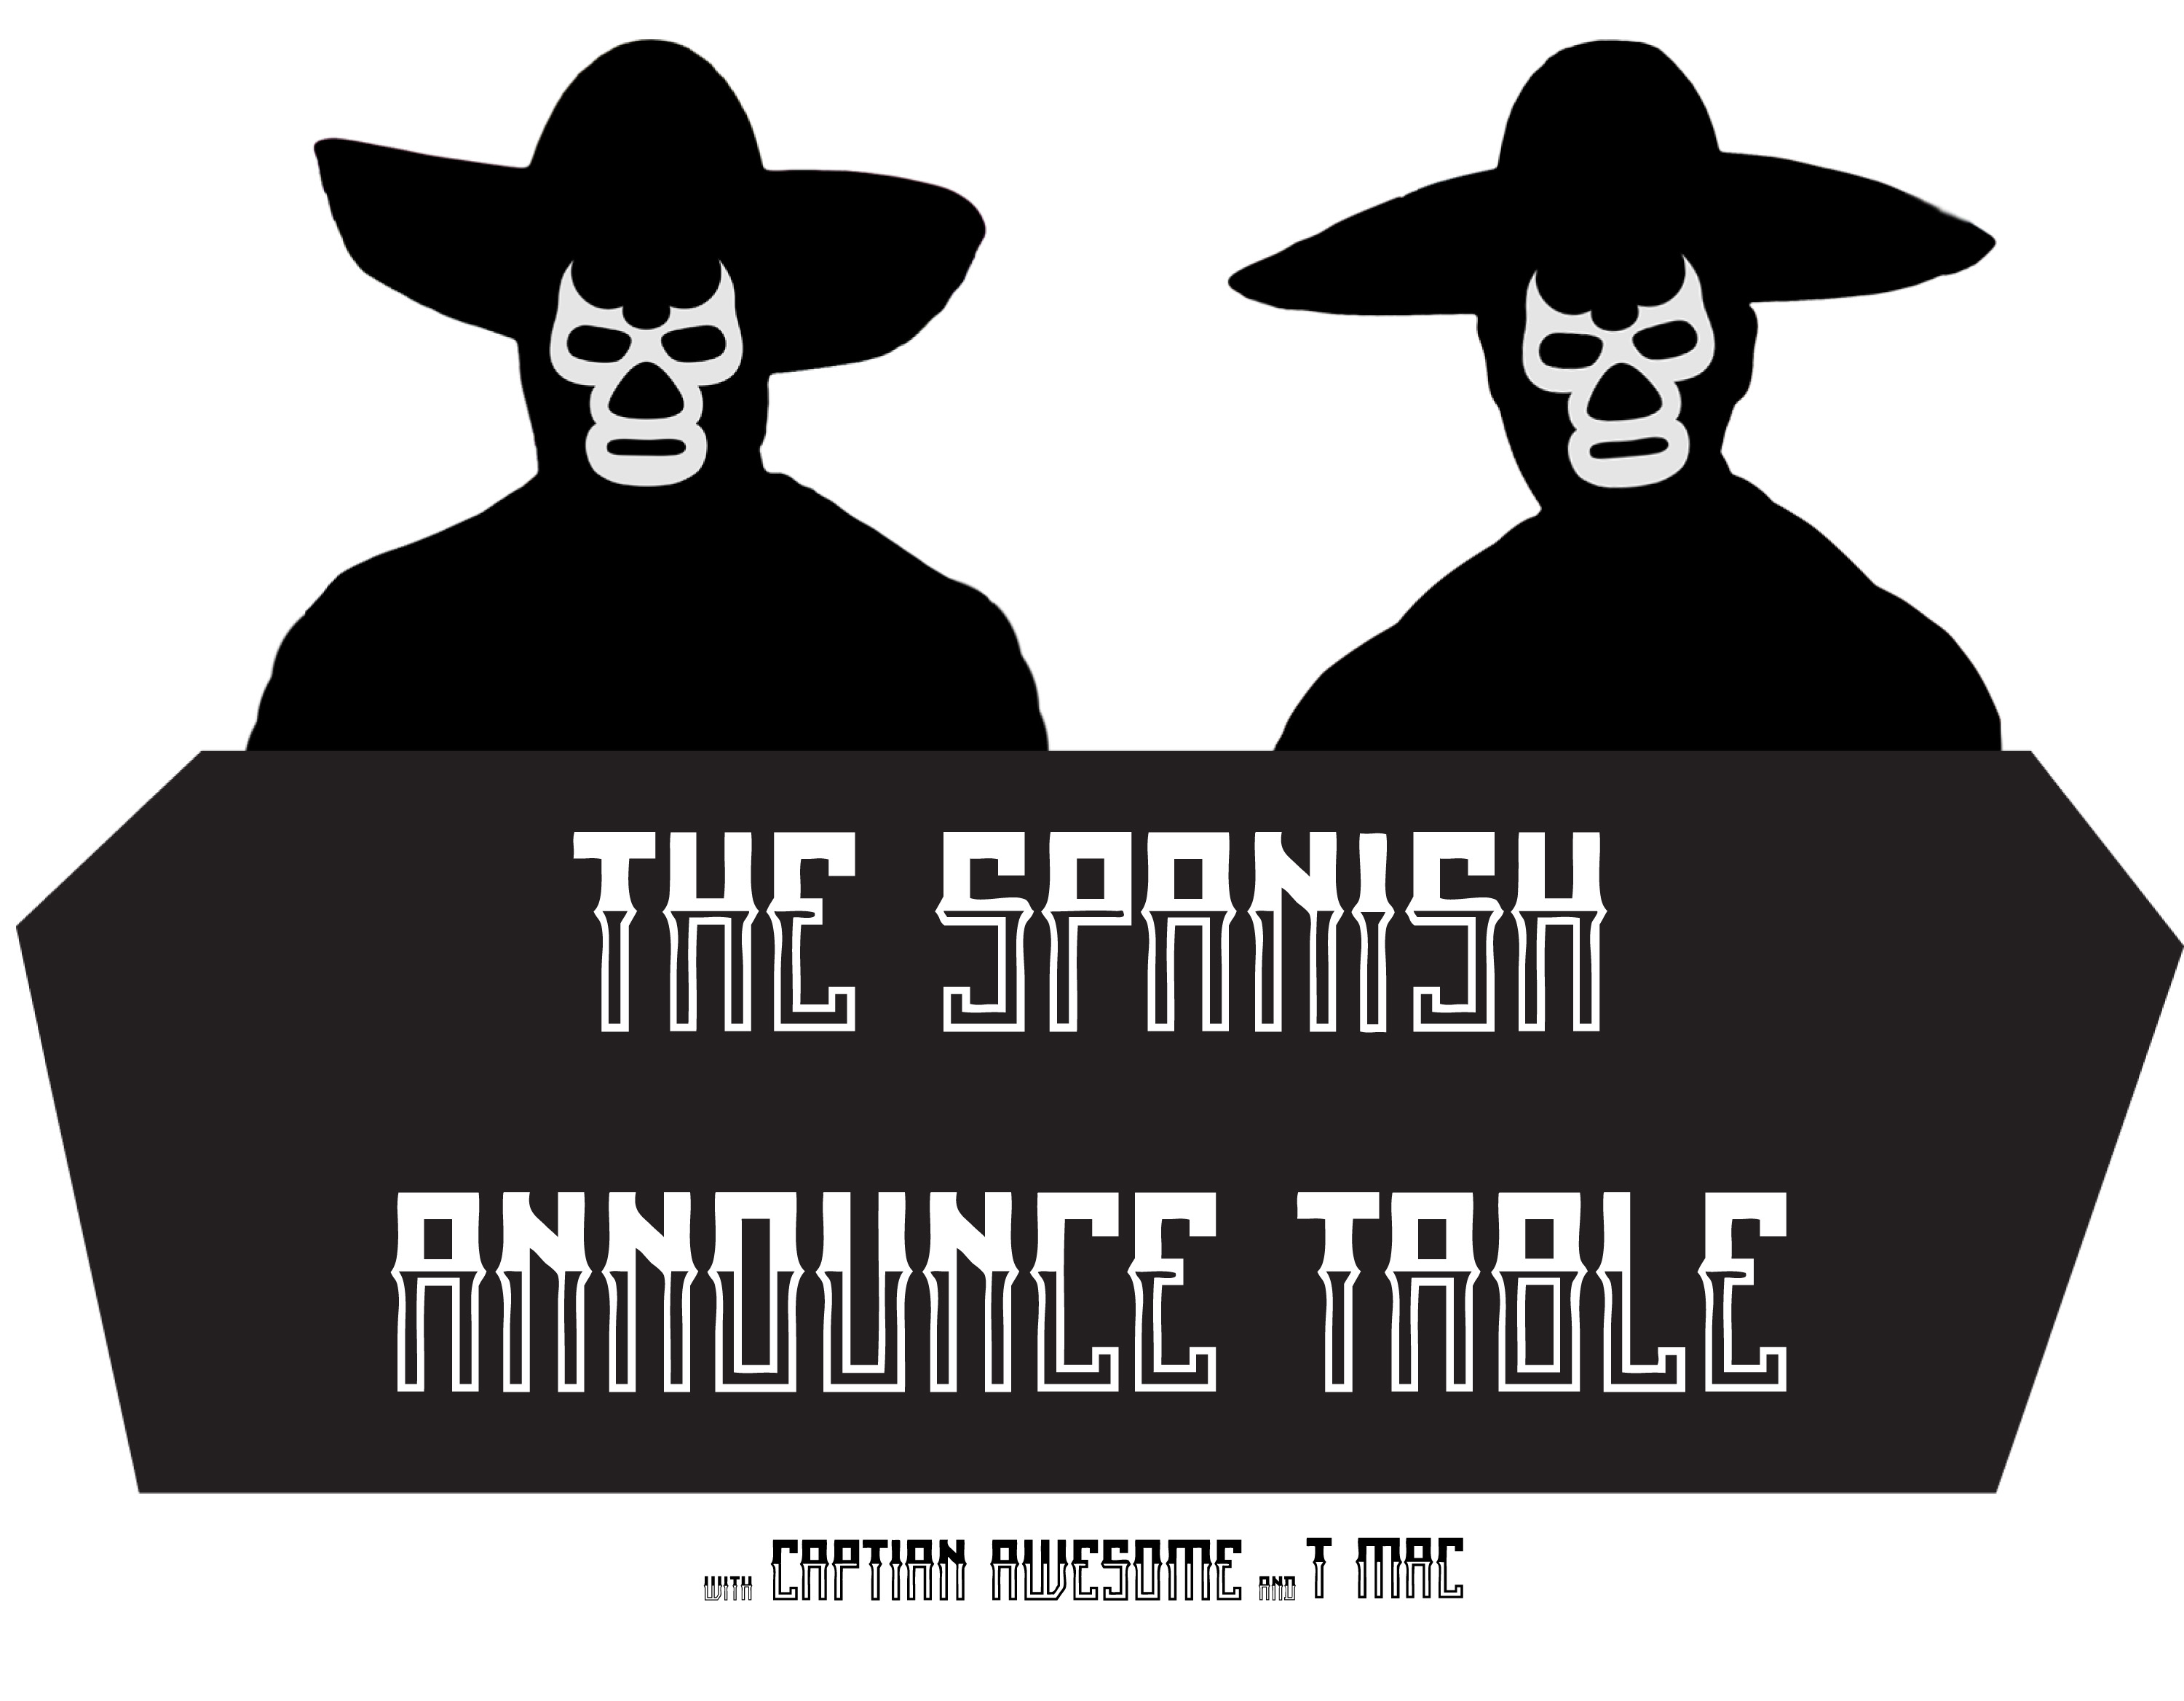 The Spanish Announce Table - NWL KC Special - 02.18.2017